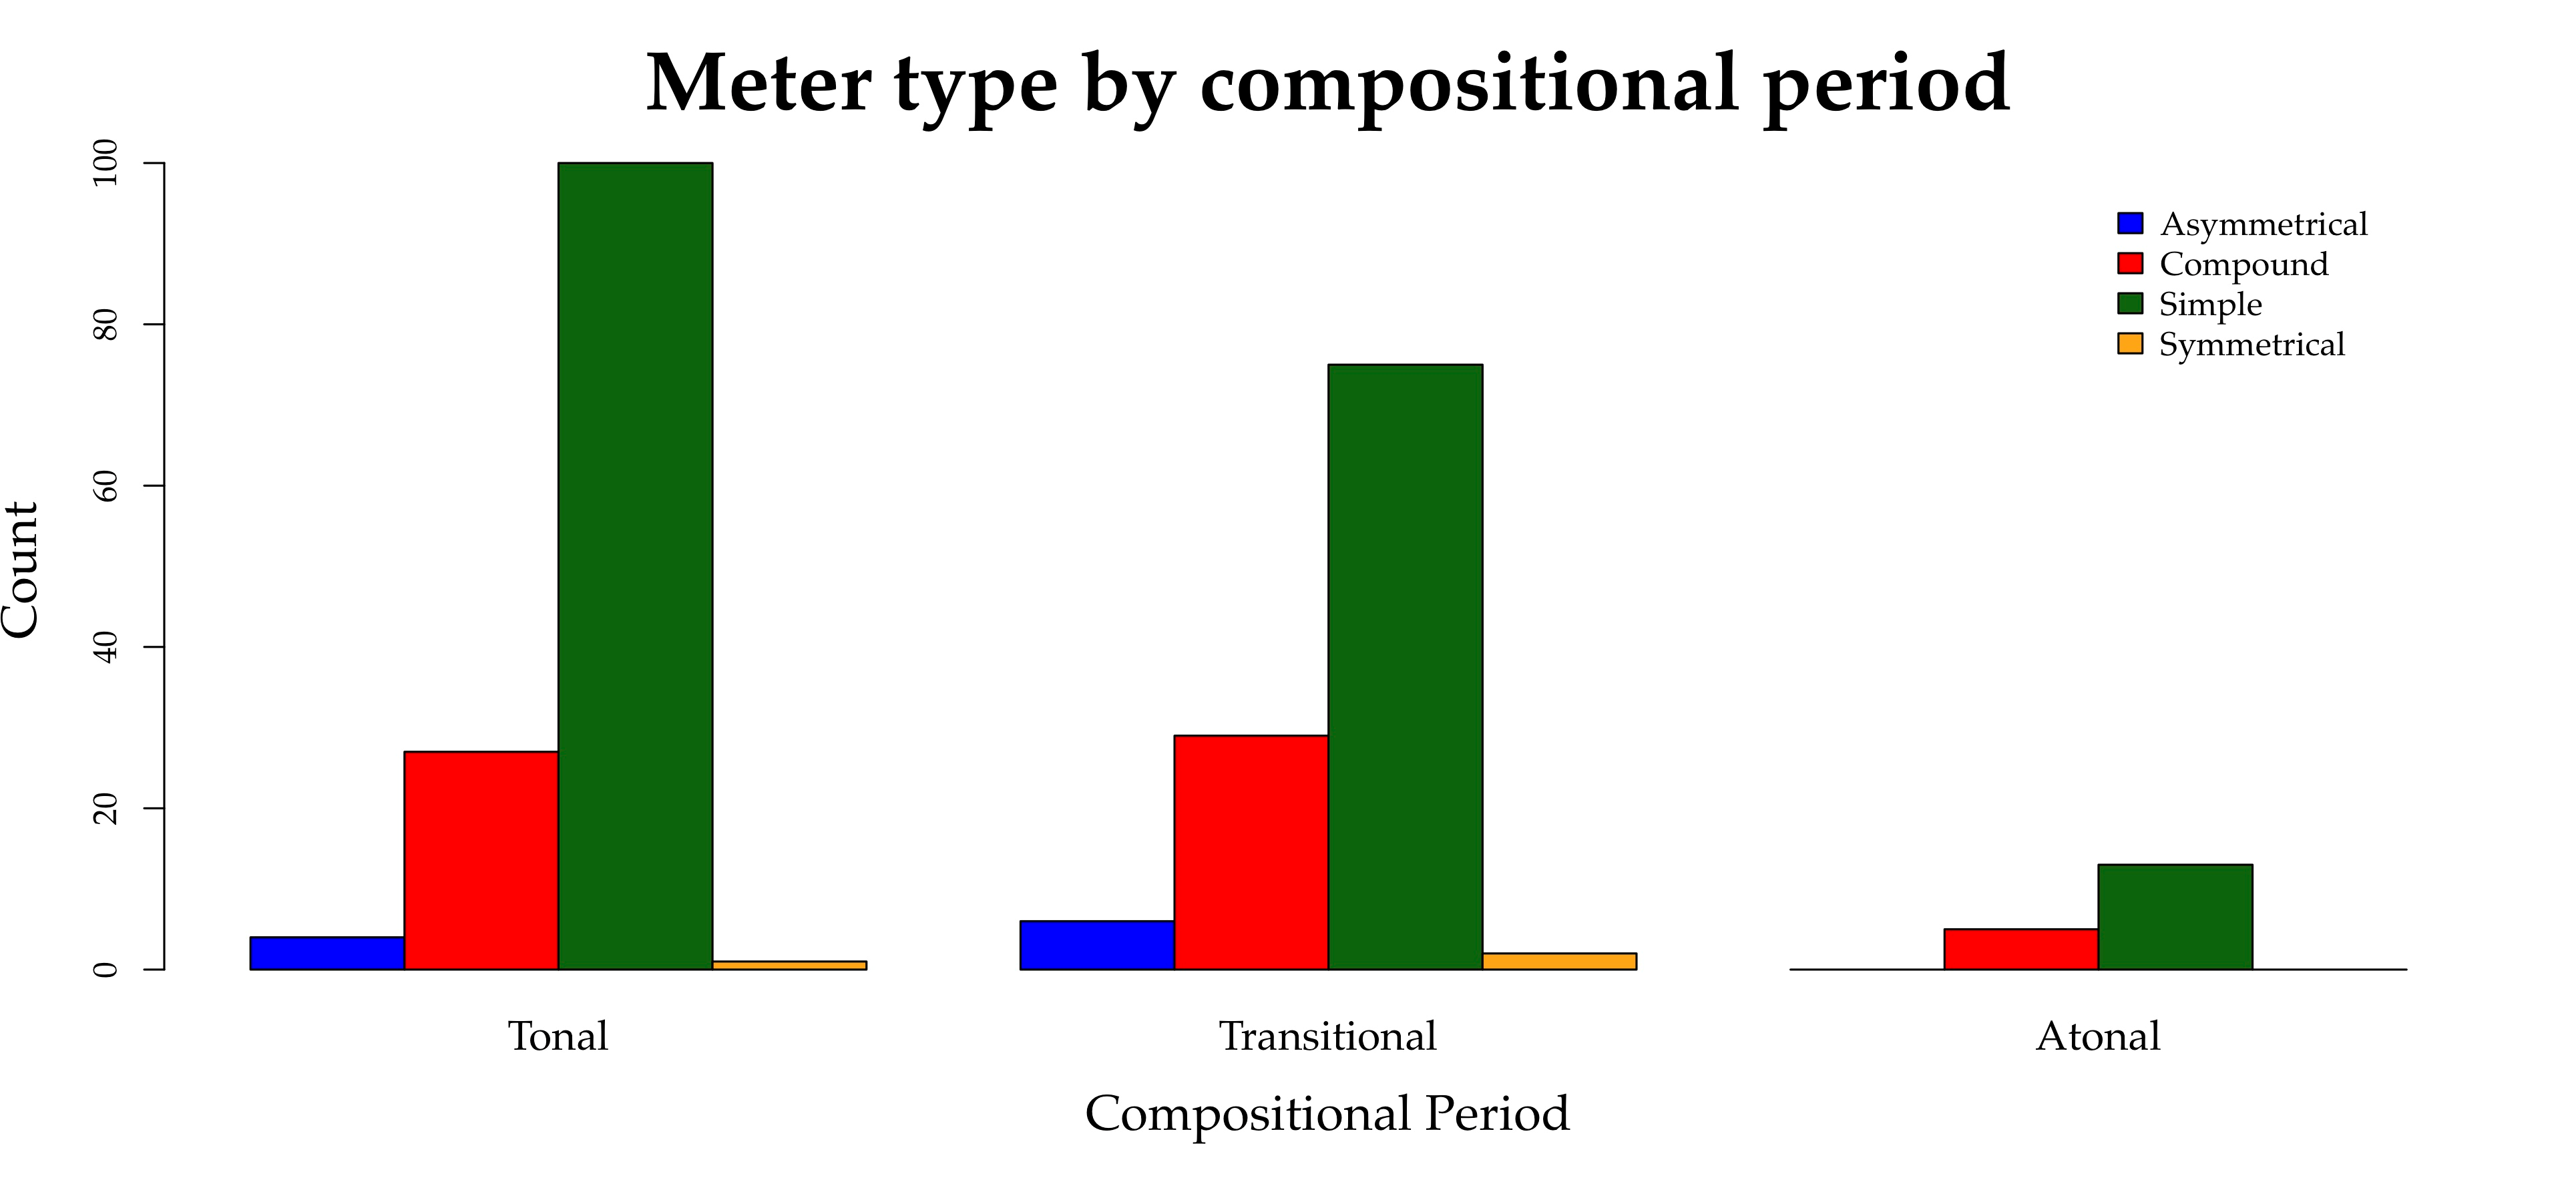 Bar graph showing Meter type by compositional period. More description below.